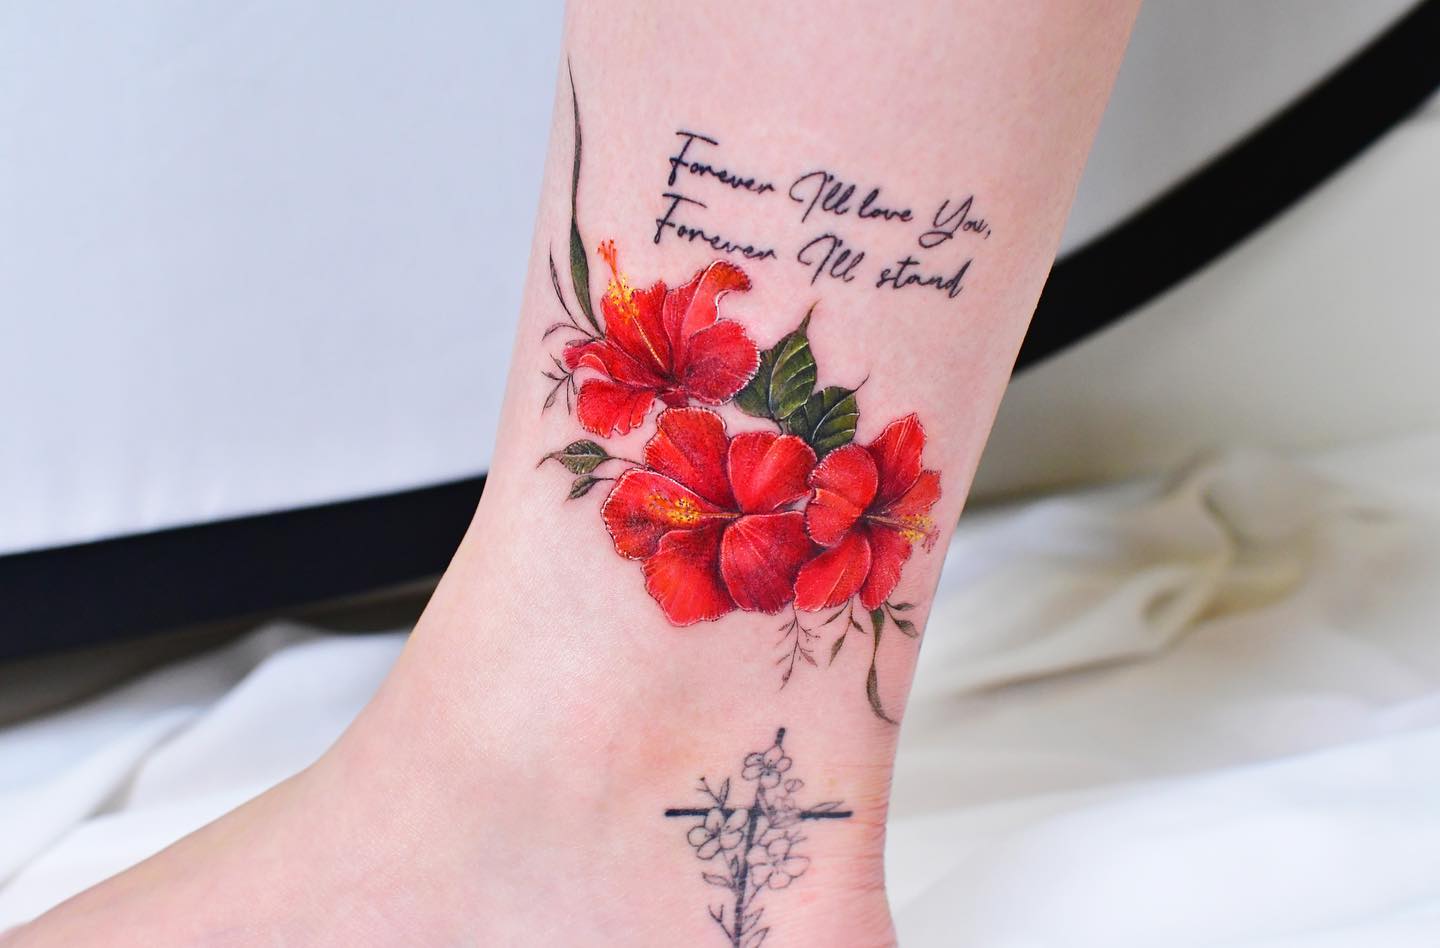 Try out a rose tattoo and place your favorite quote right next to it. Women who are sensitive, and feminine and those who are always looking for a fun and elegant design that can represent their romantic side will enjoy this concept.